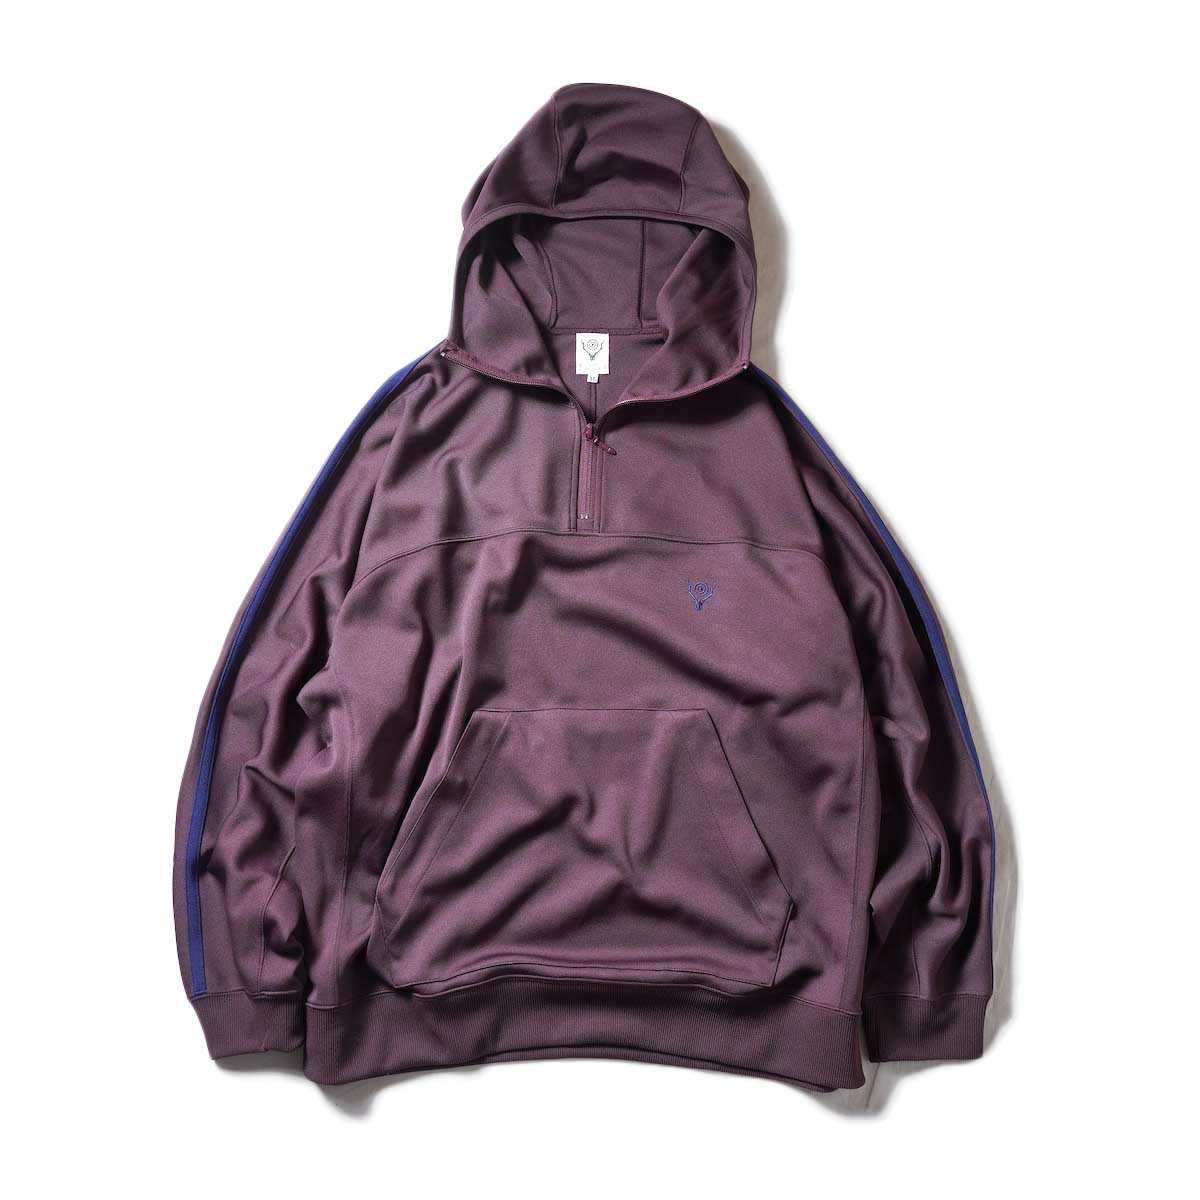 South2 West8 / Trainer Hoody - Poly Smooth (Burgundy)